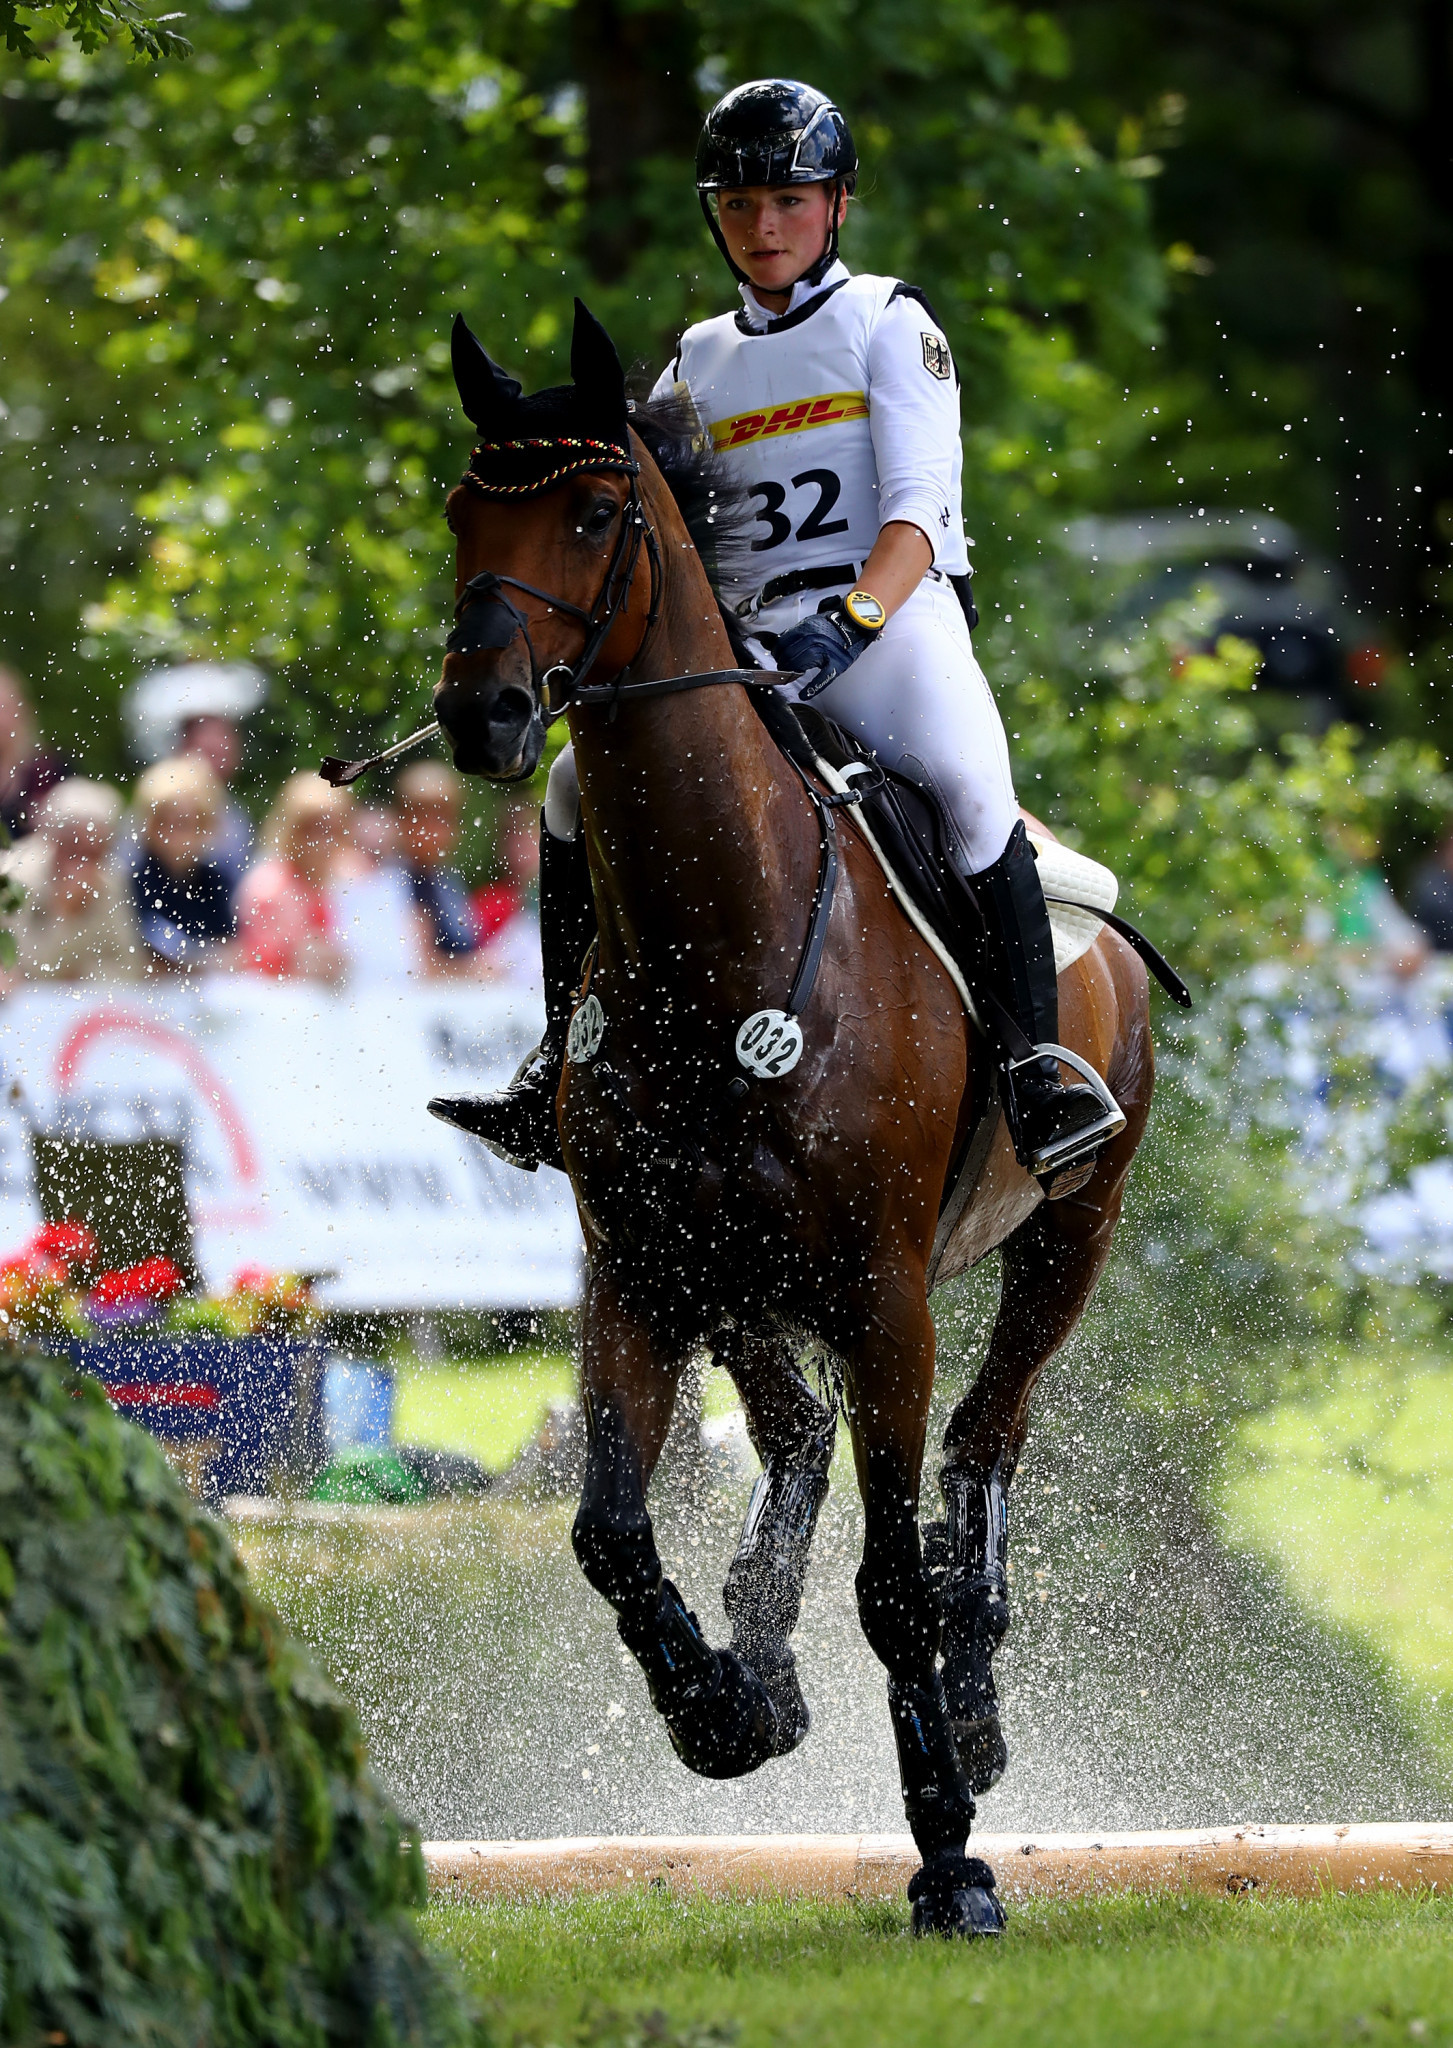 Germany move into lead after day two of FEI Nations Cup Eventing leg in Boekelo